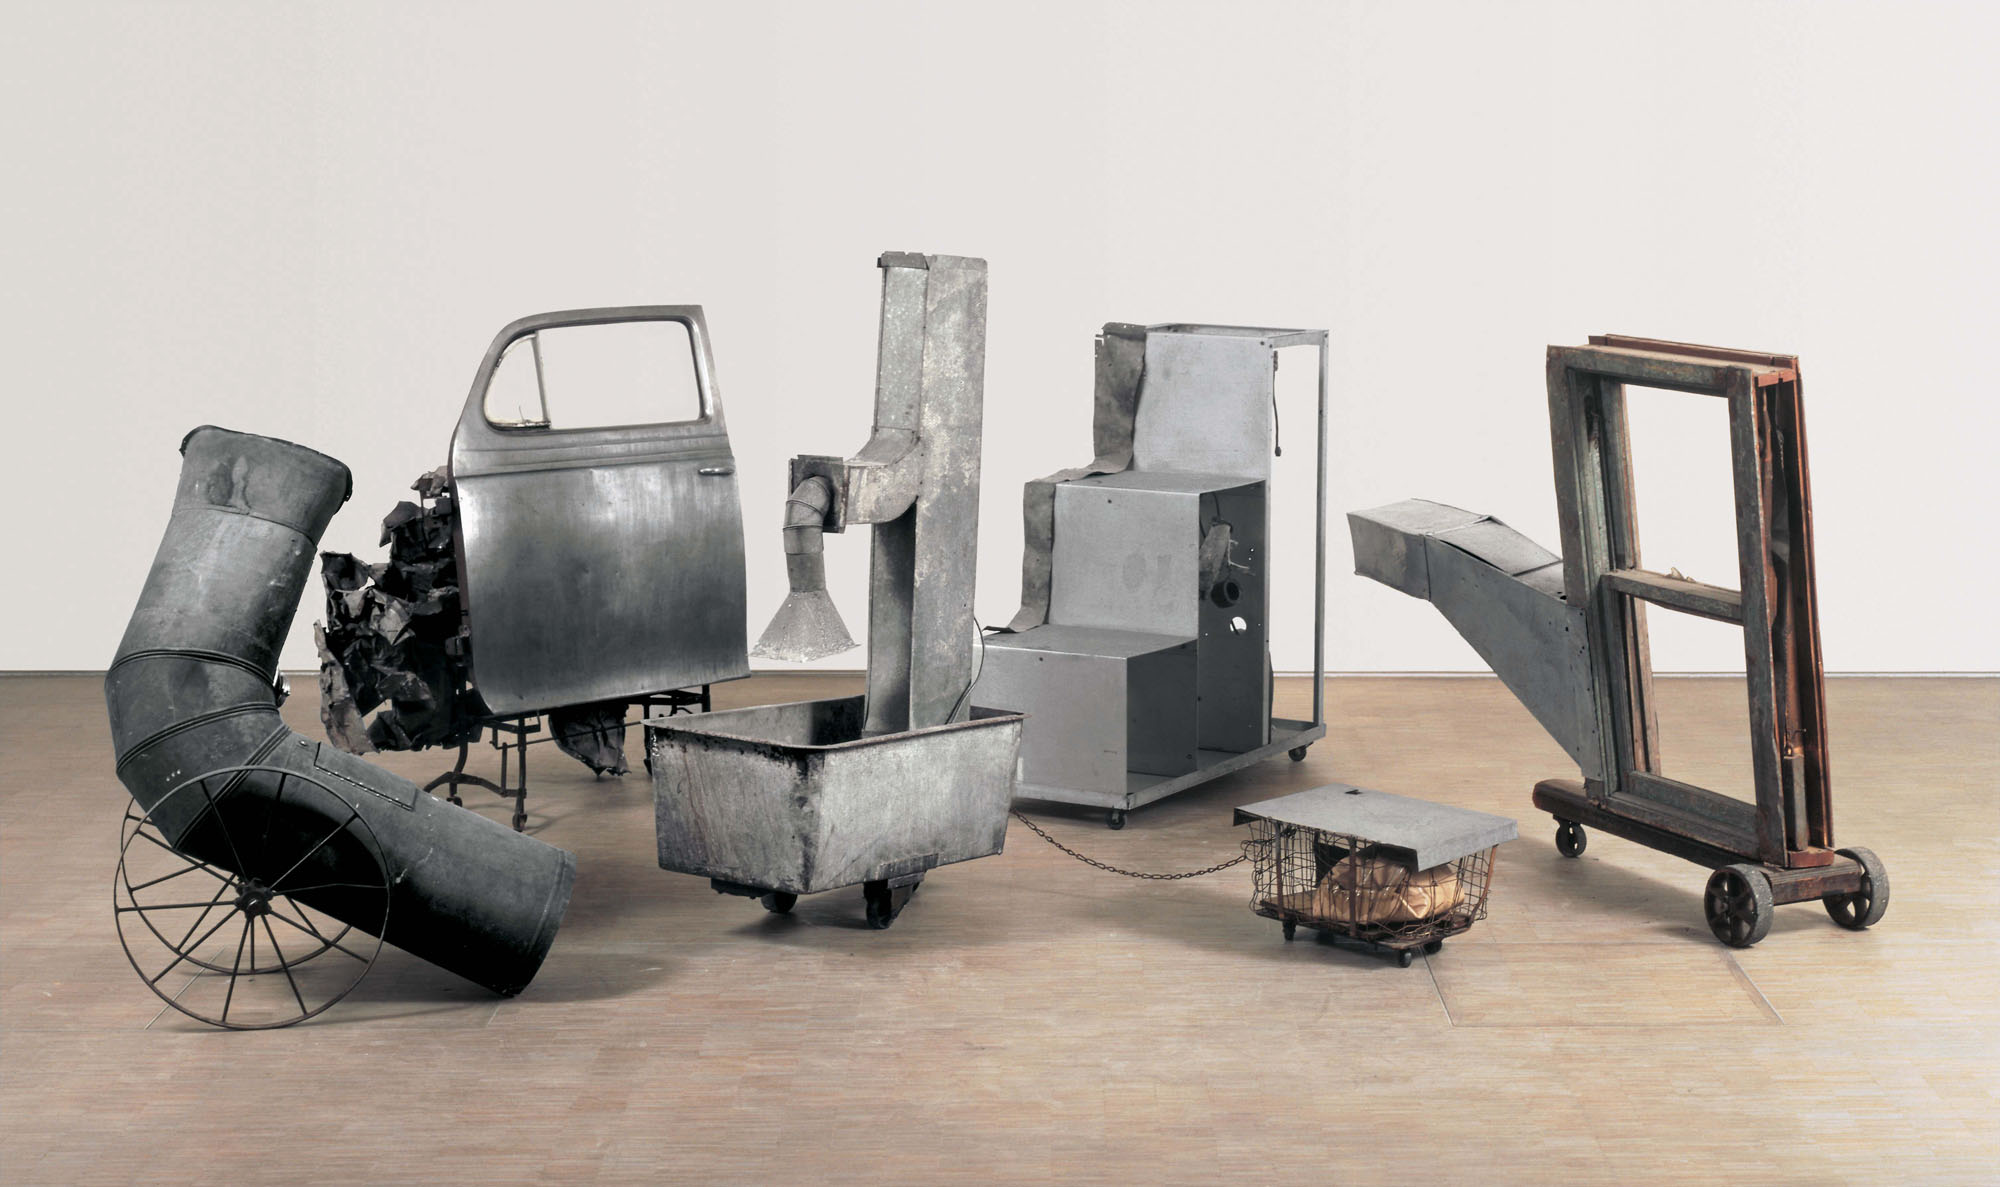 © Robert Rauschenberg Foundation. Oracle, 1962-65 Five-part found-metal assemblage with five concealed radios Dimensions variable Museé National d'Art Moderne, Centre Georges Pompidou, Paris